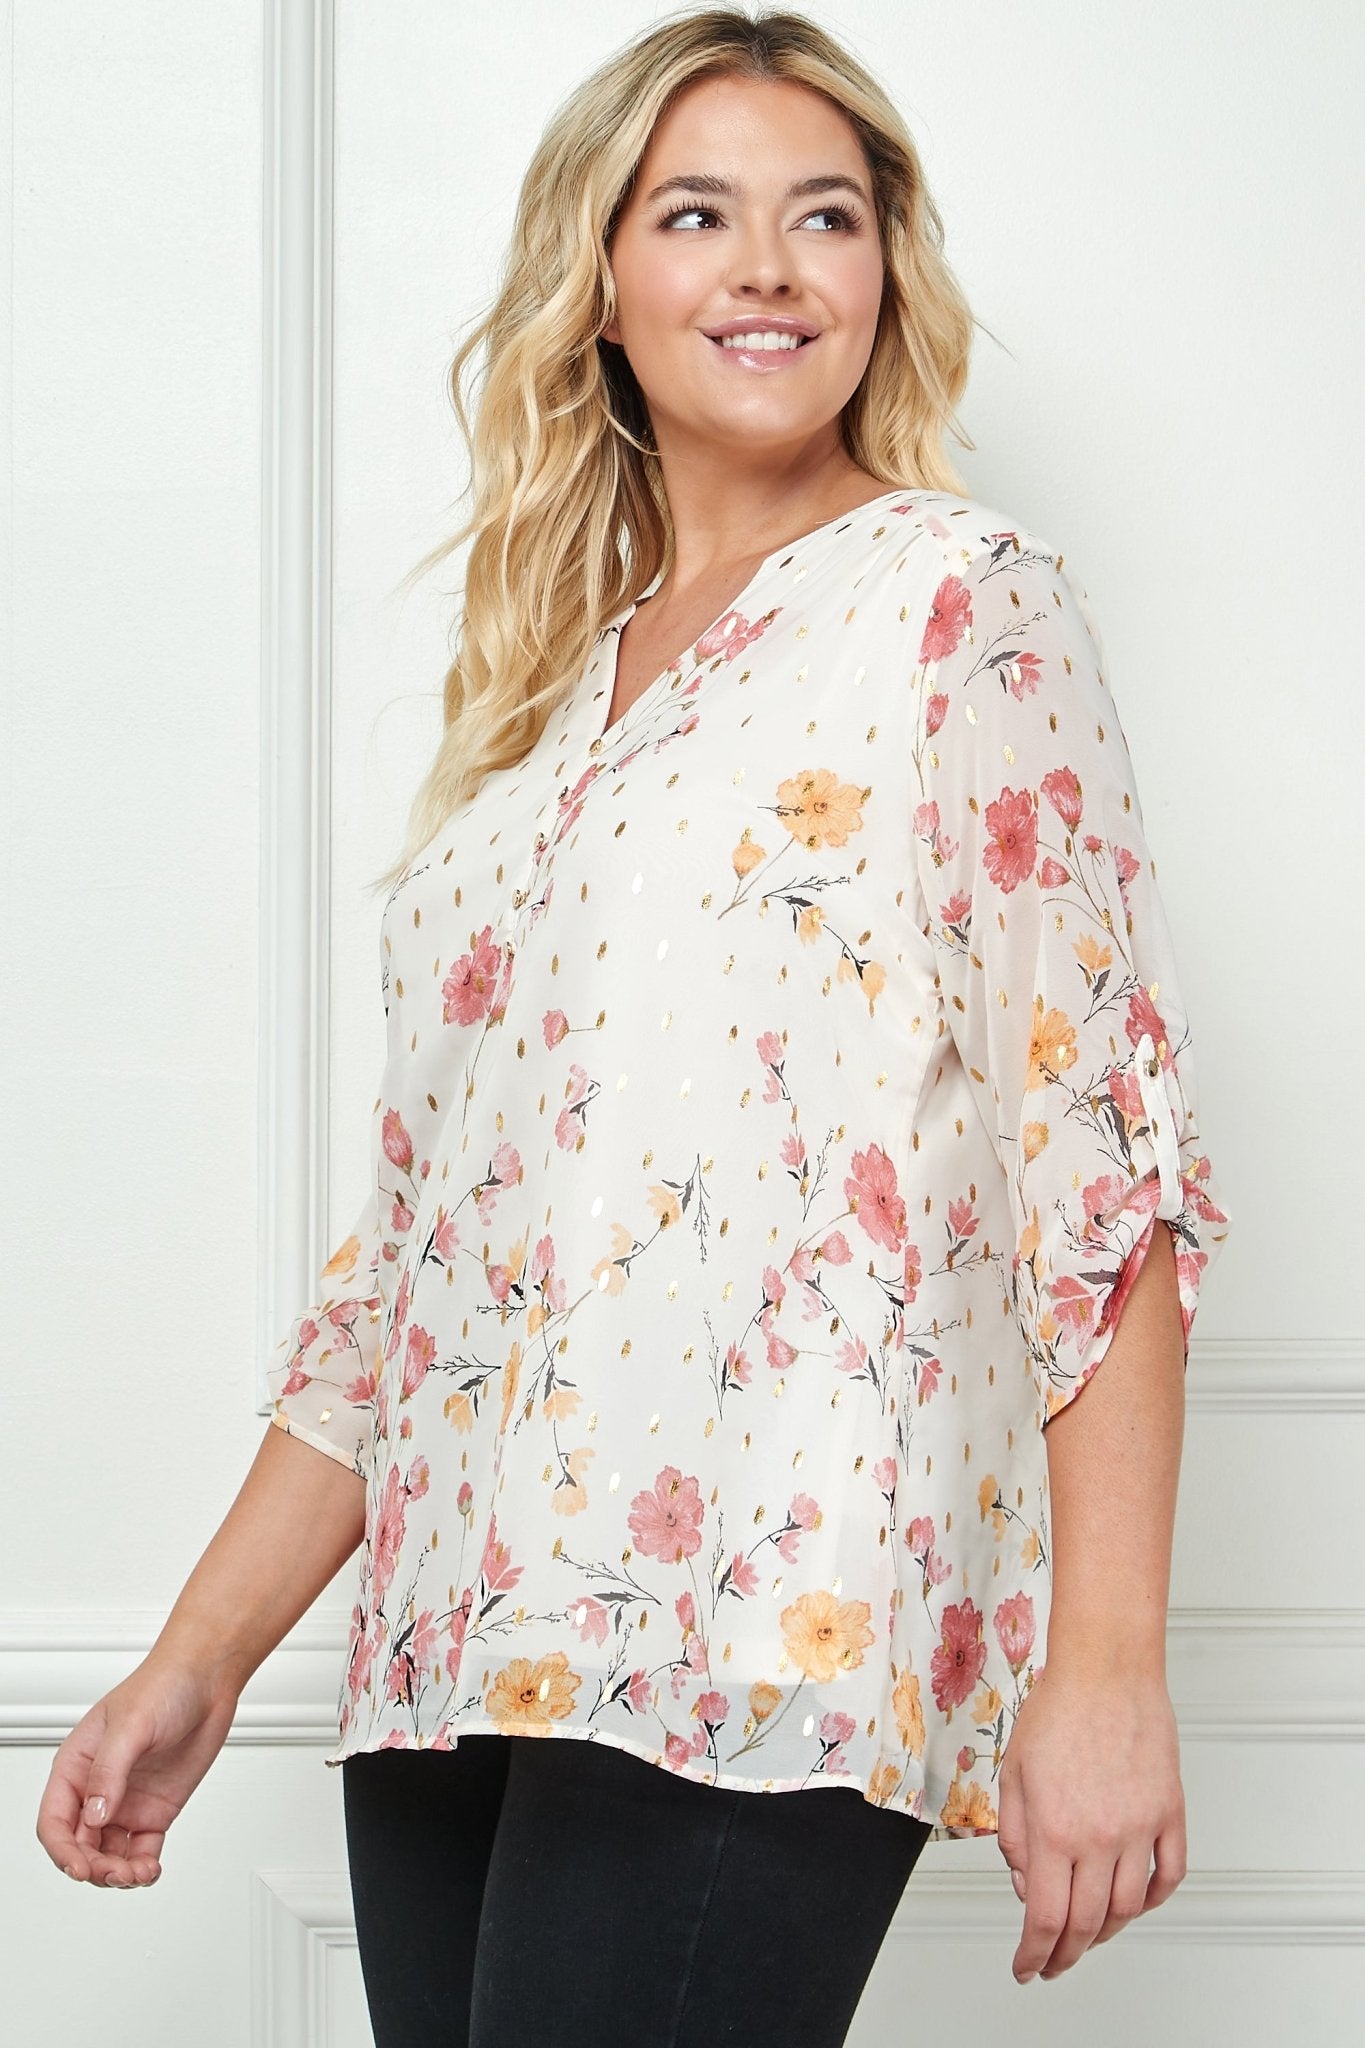 Sara Michelle Ivory Floral 3/4 Button Tab Sleeve Mandarin Collar Lined Popover Blouse - Plus - DressbarnShirts & Blouses